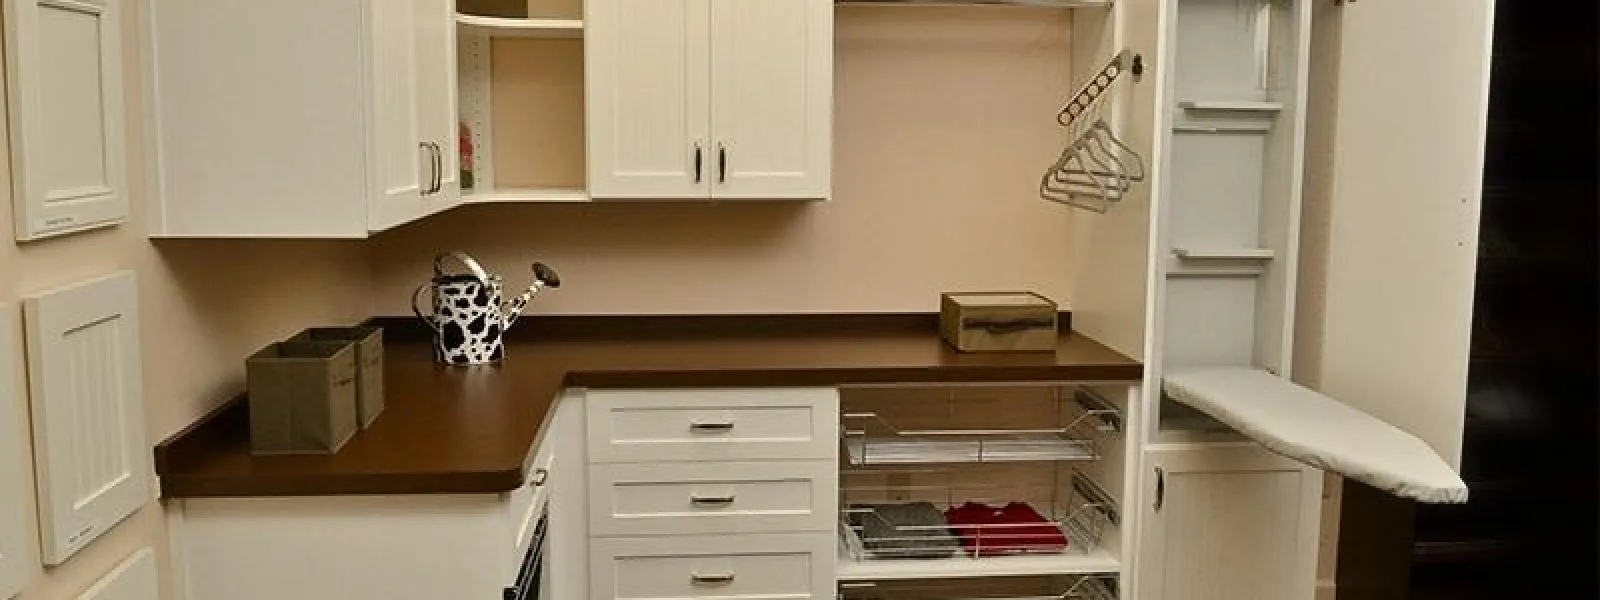 a laundry room with an ironing board